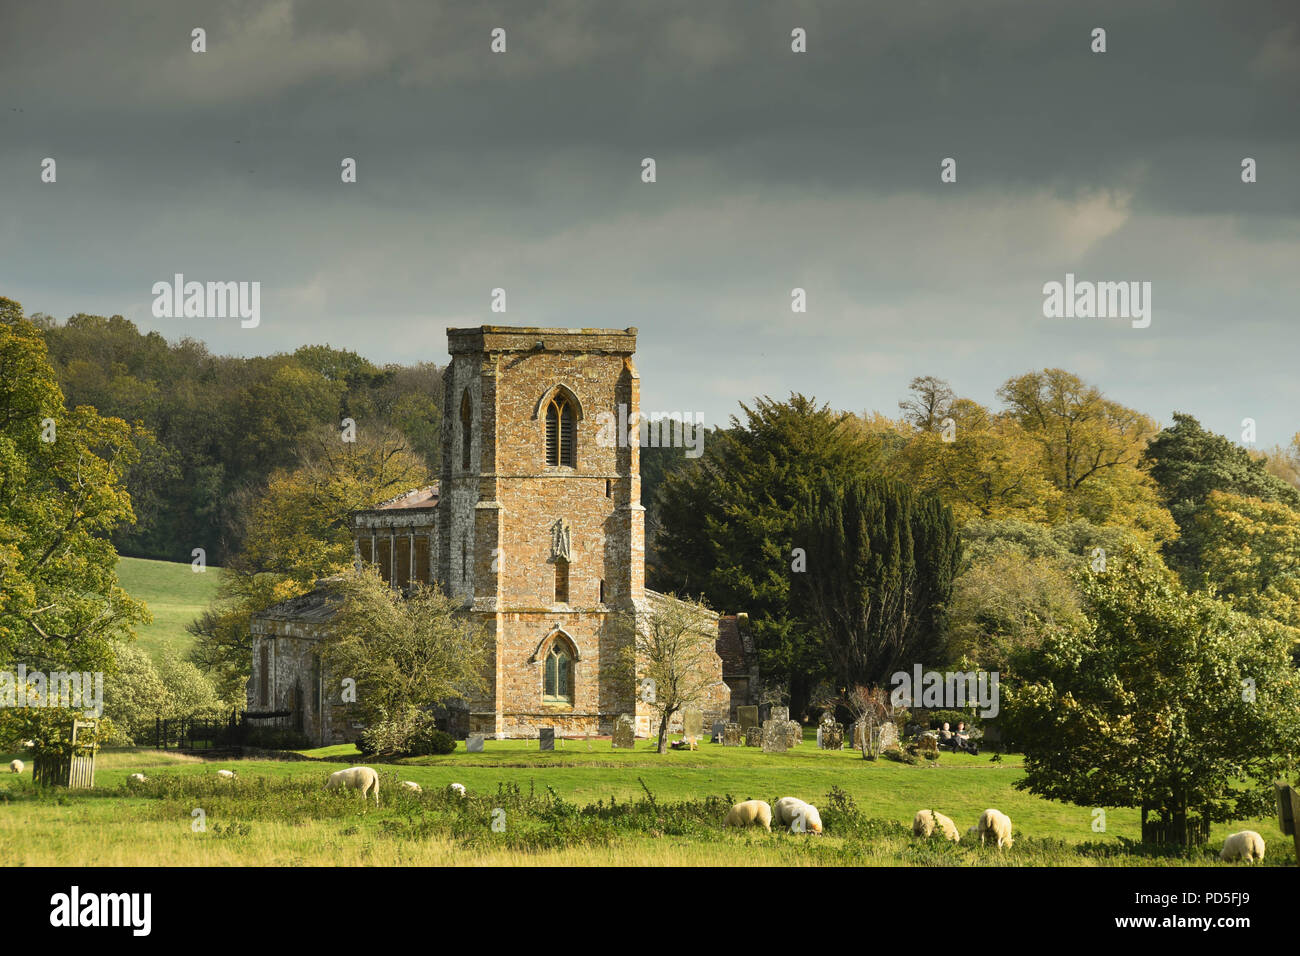 The medieval Church of St Mary the Virgin near Daventry, Northamptonshire, England, which is in a rural setting surrounded by fields and trees. Stock Photo